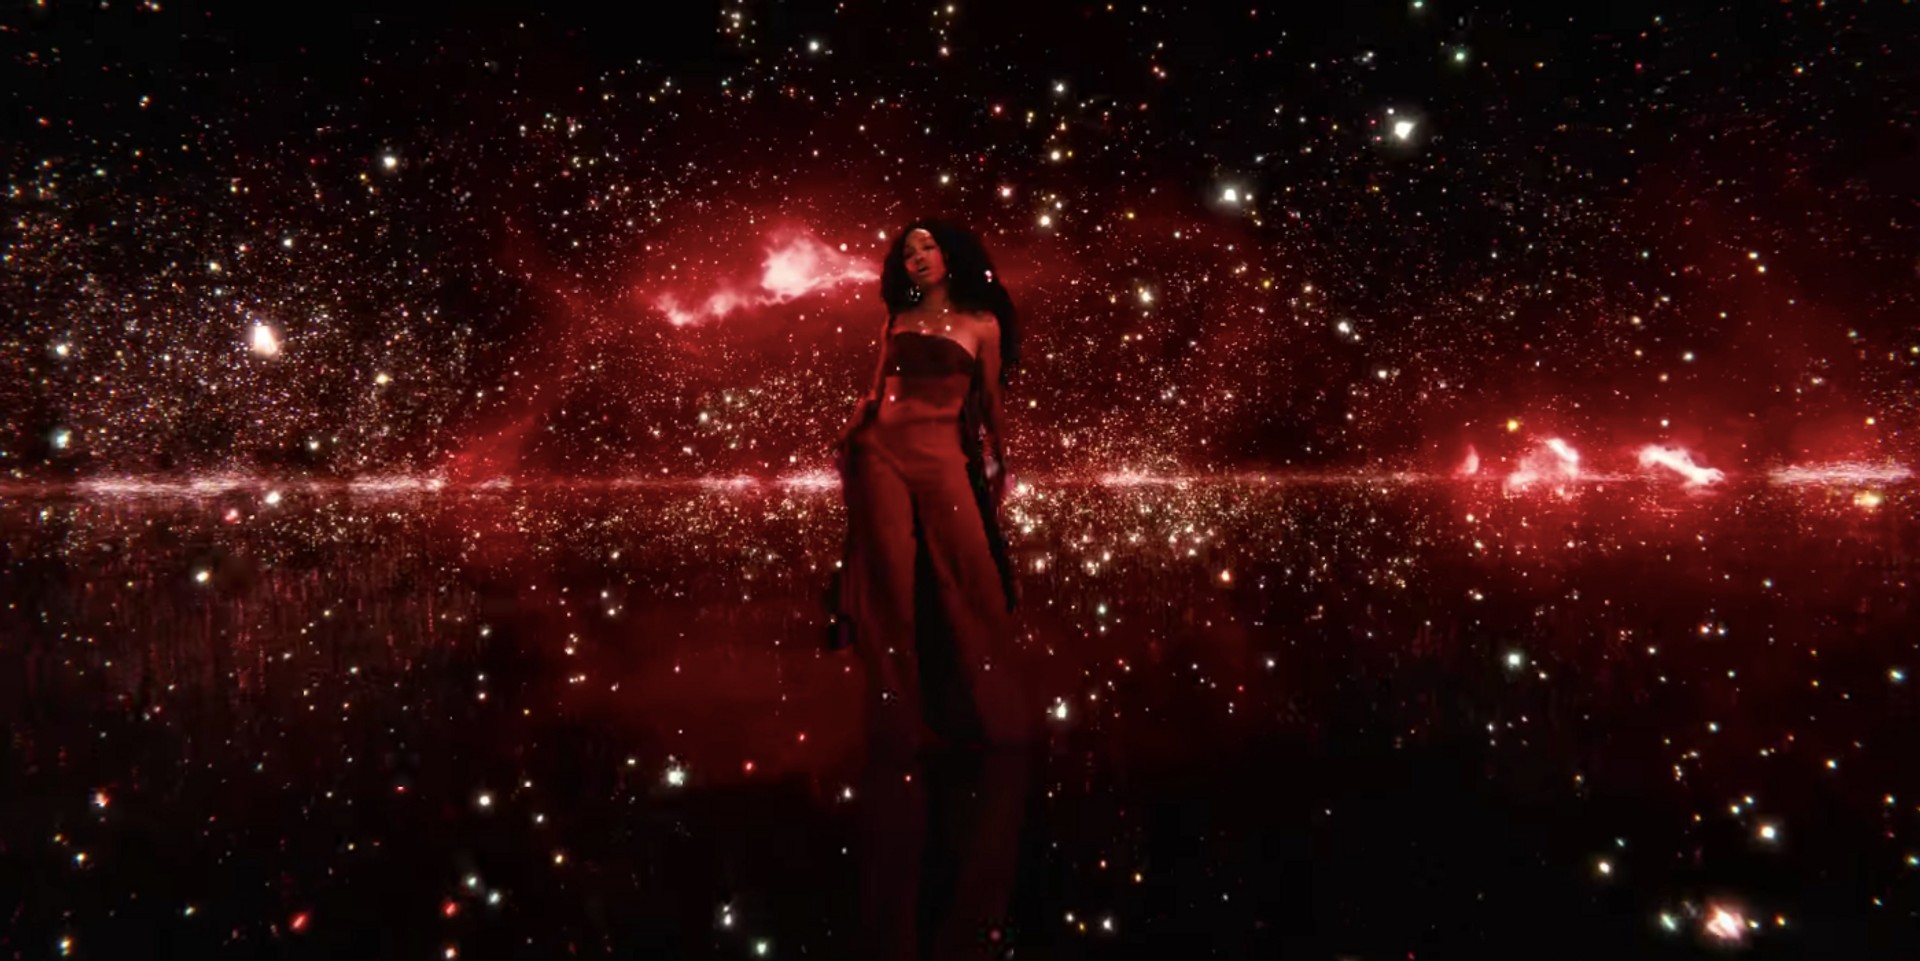 Kendrick Lamar and SZA release stunning music video for 'All The Stars' – watch